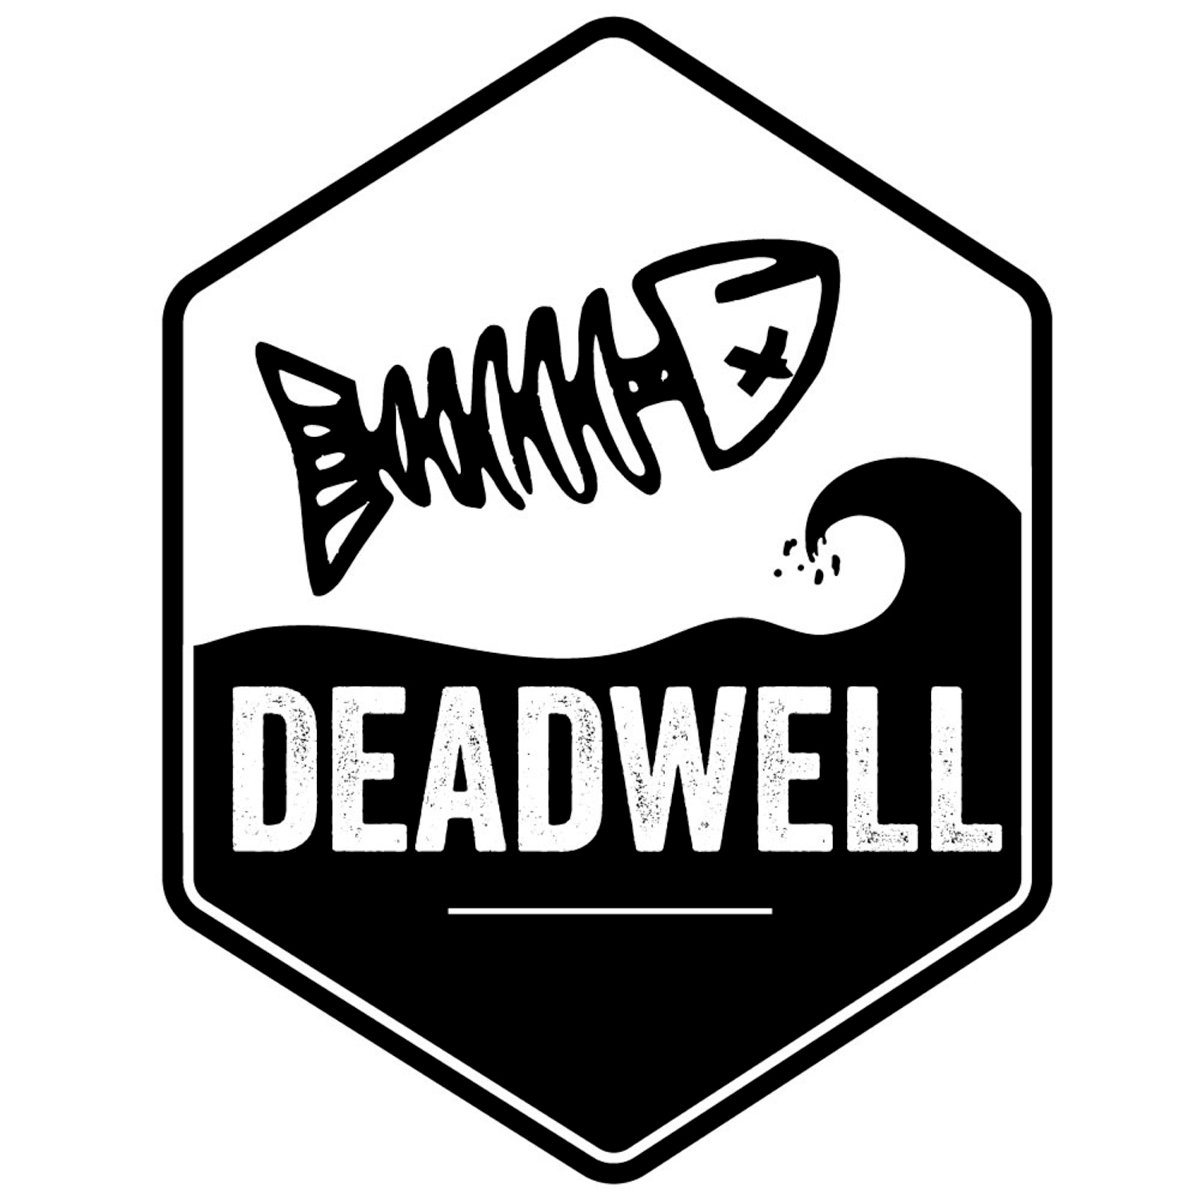 DEADWELL / “Humans Rise”